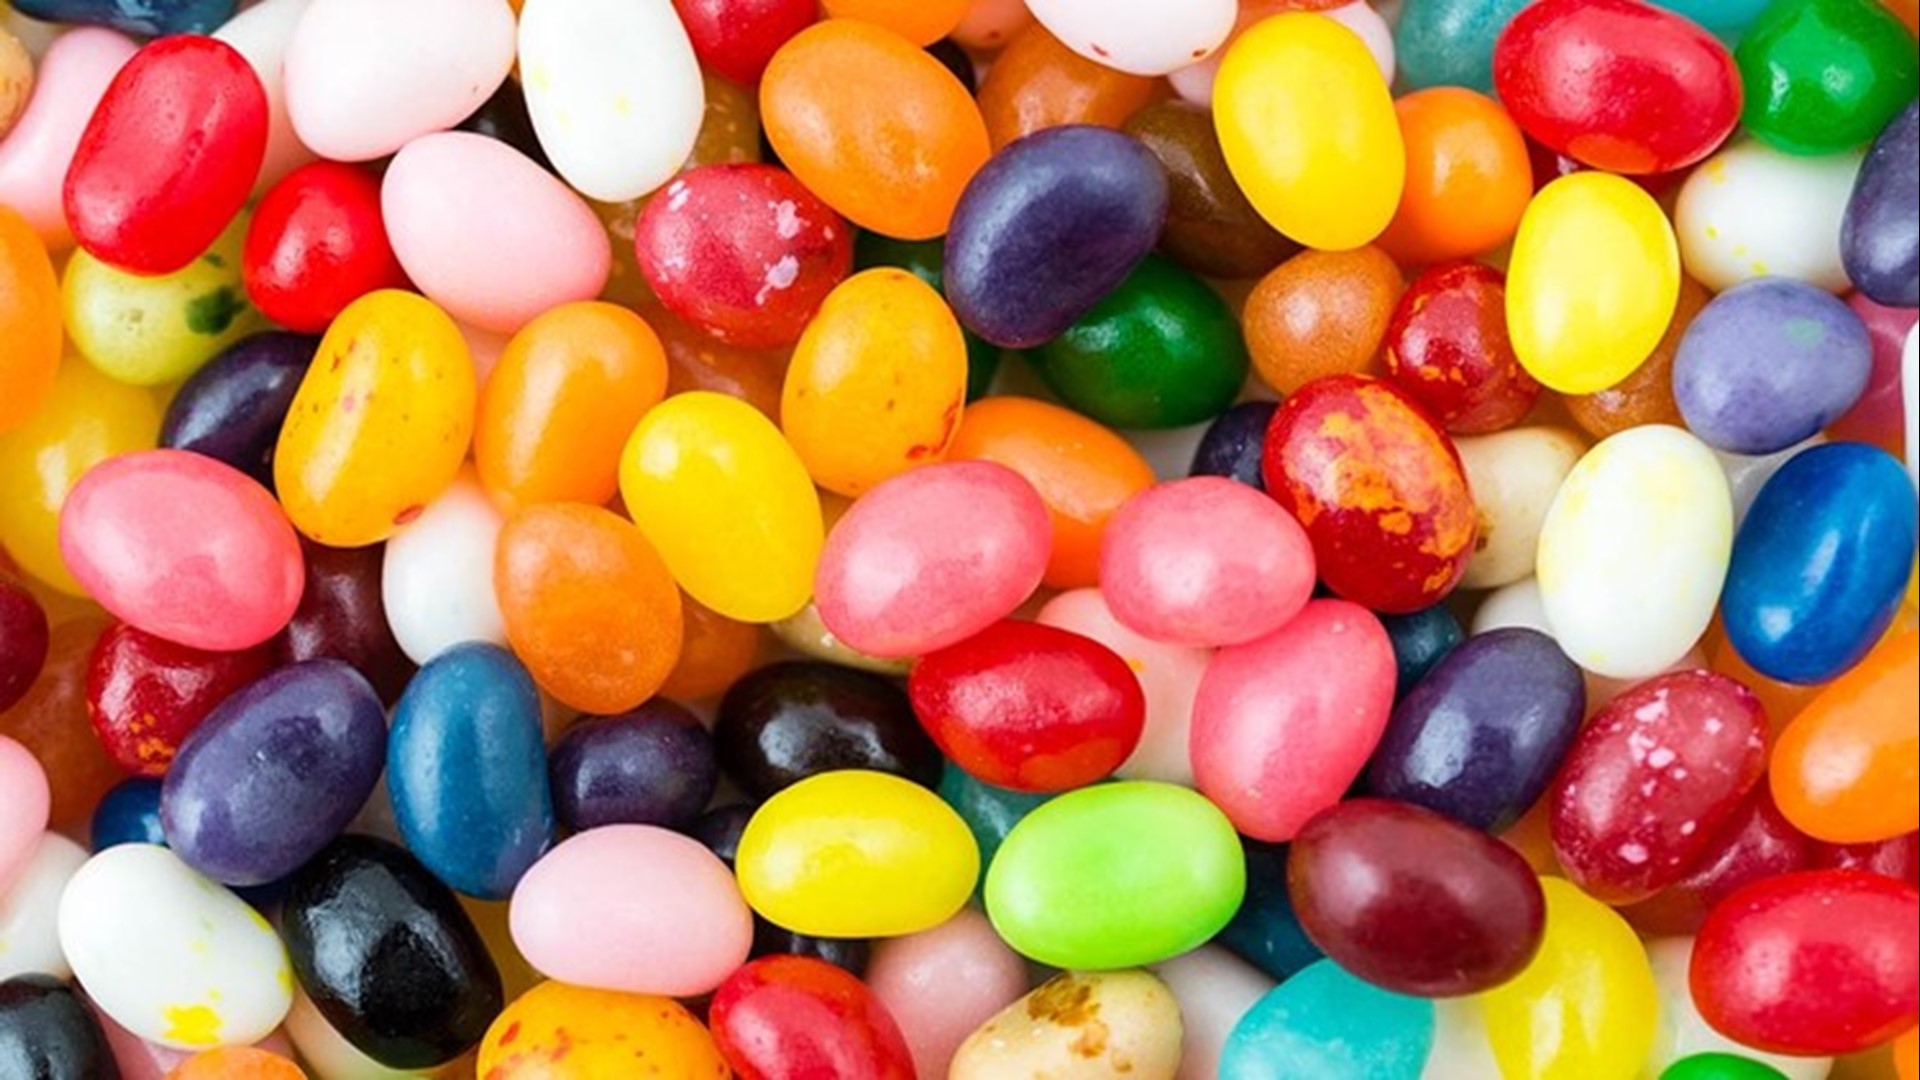 Forget the fight over Peep popularity. The hottest Easter candy debate is over the most popular jelly bean flavor. And the winner is...